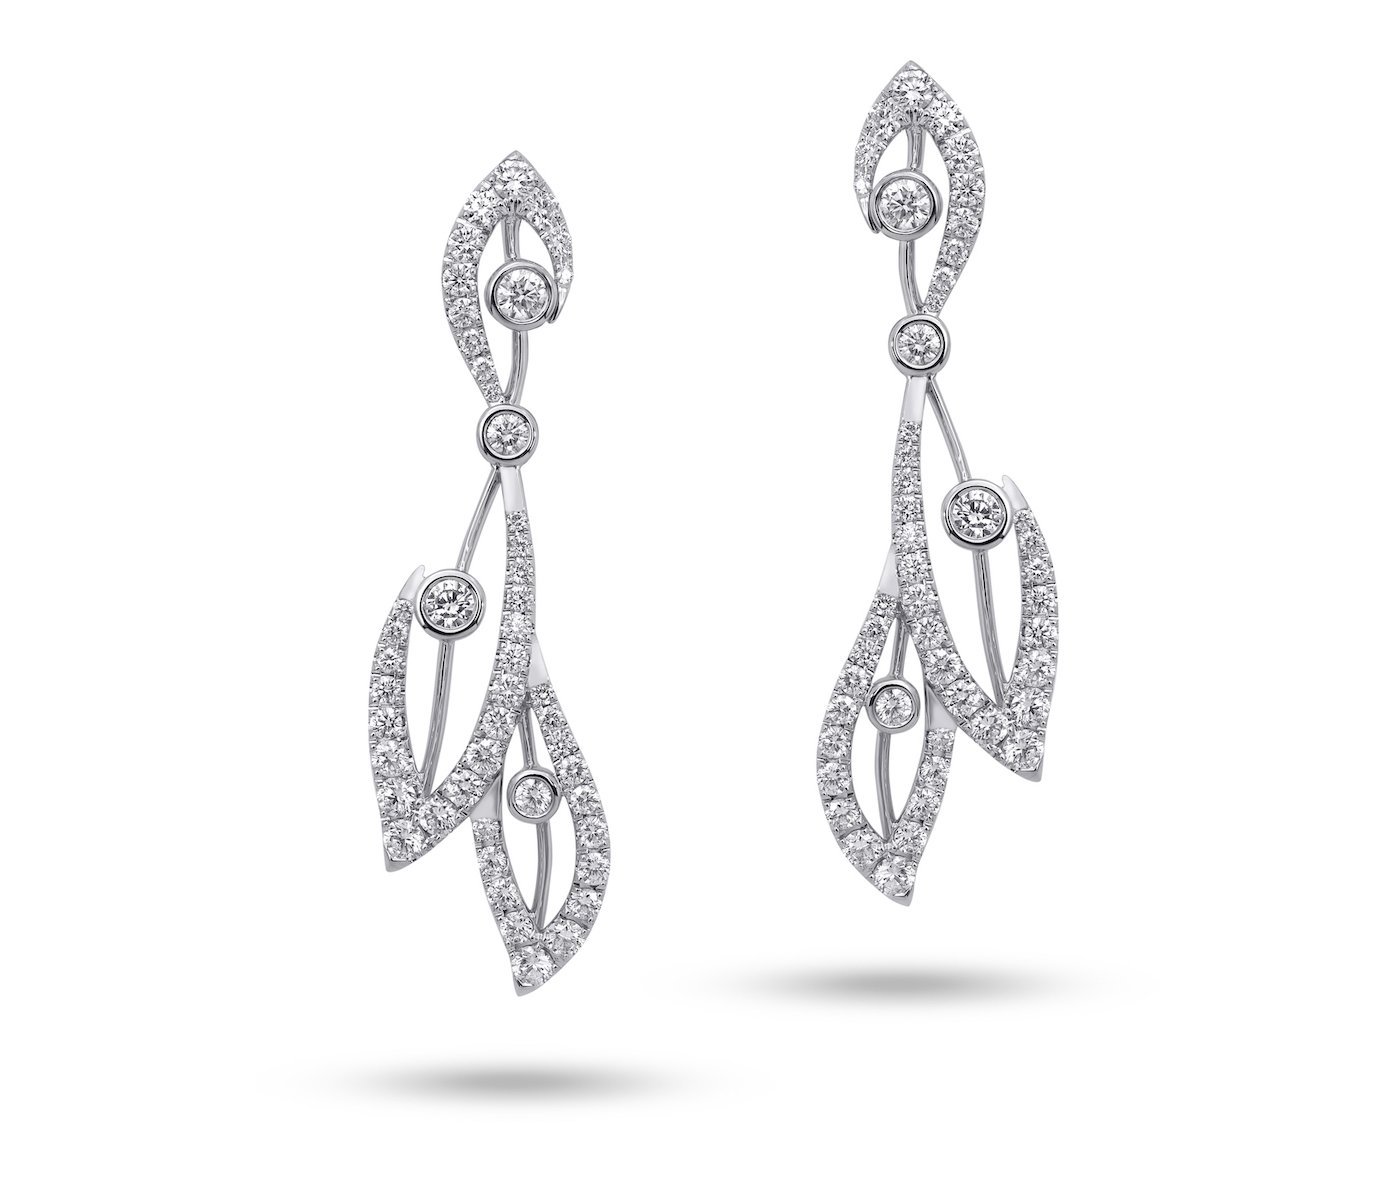 Earrings from Stenzhorn Amalfi Collection